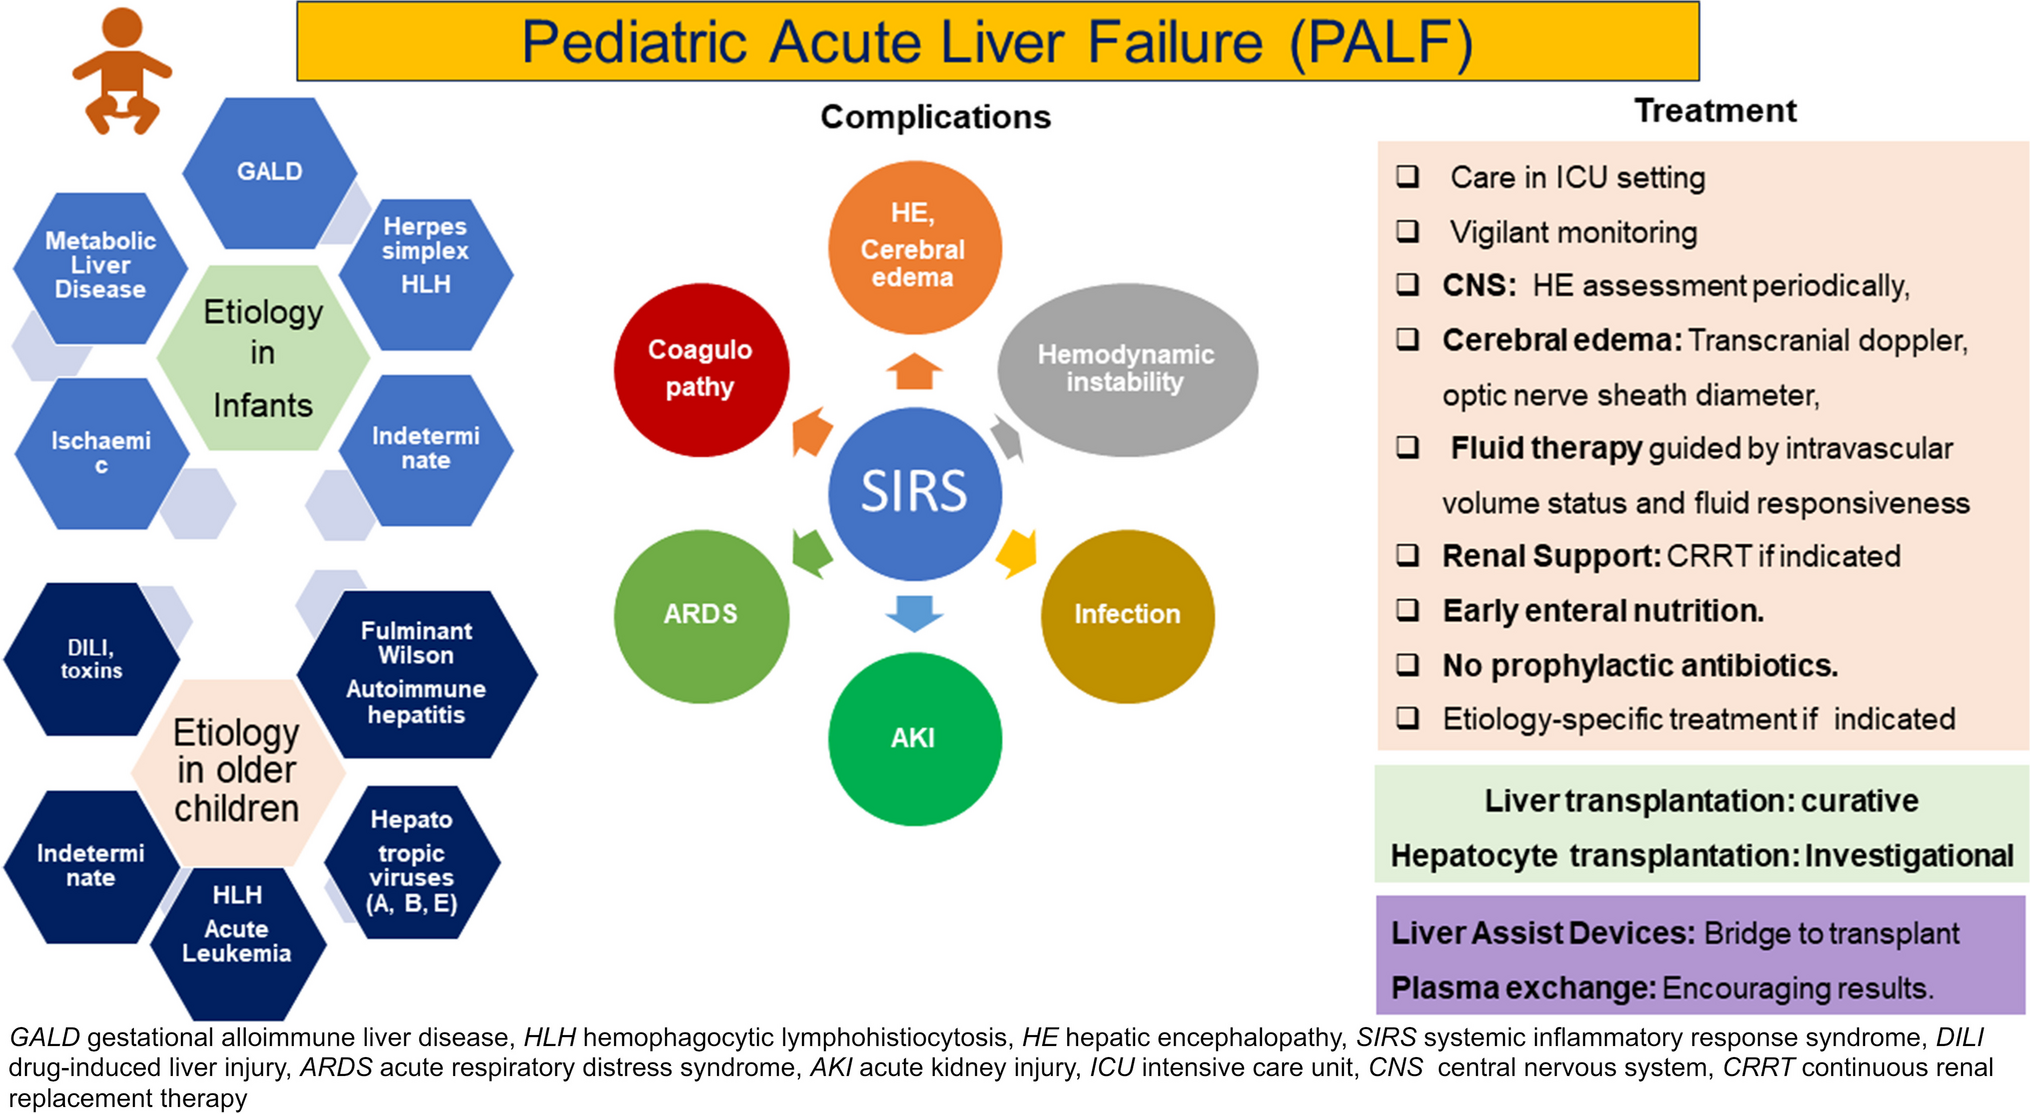 Pediatric acute liver failure: Current perspective in etiology and management